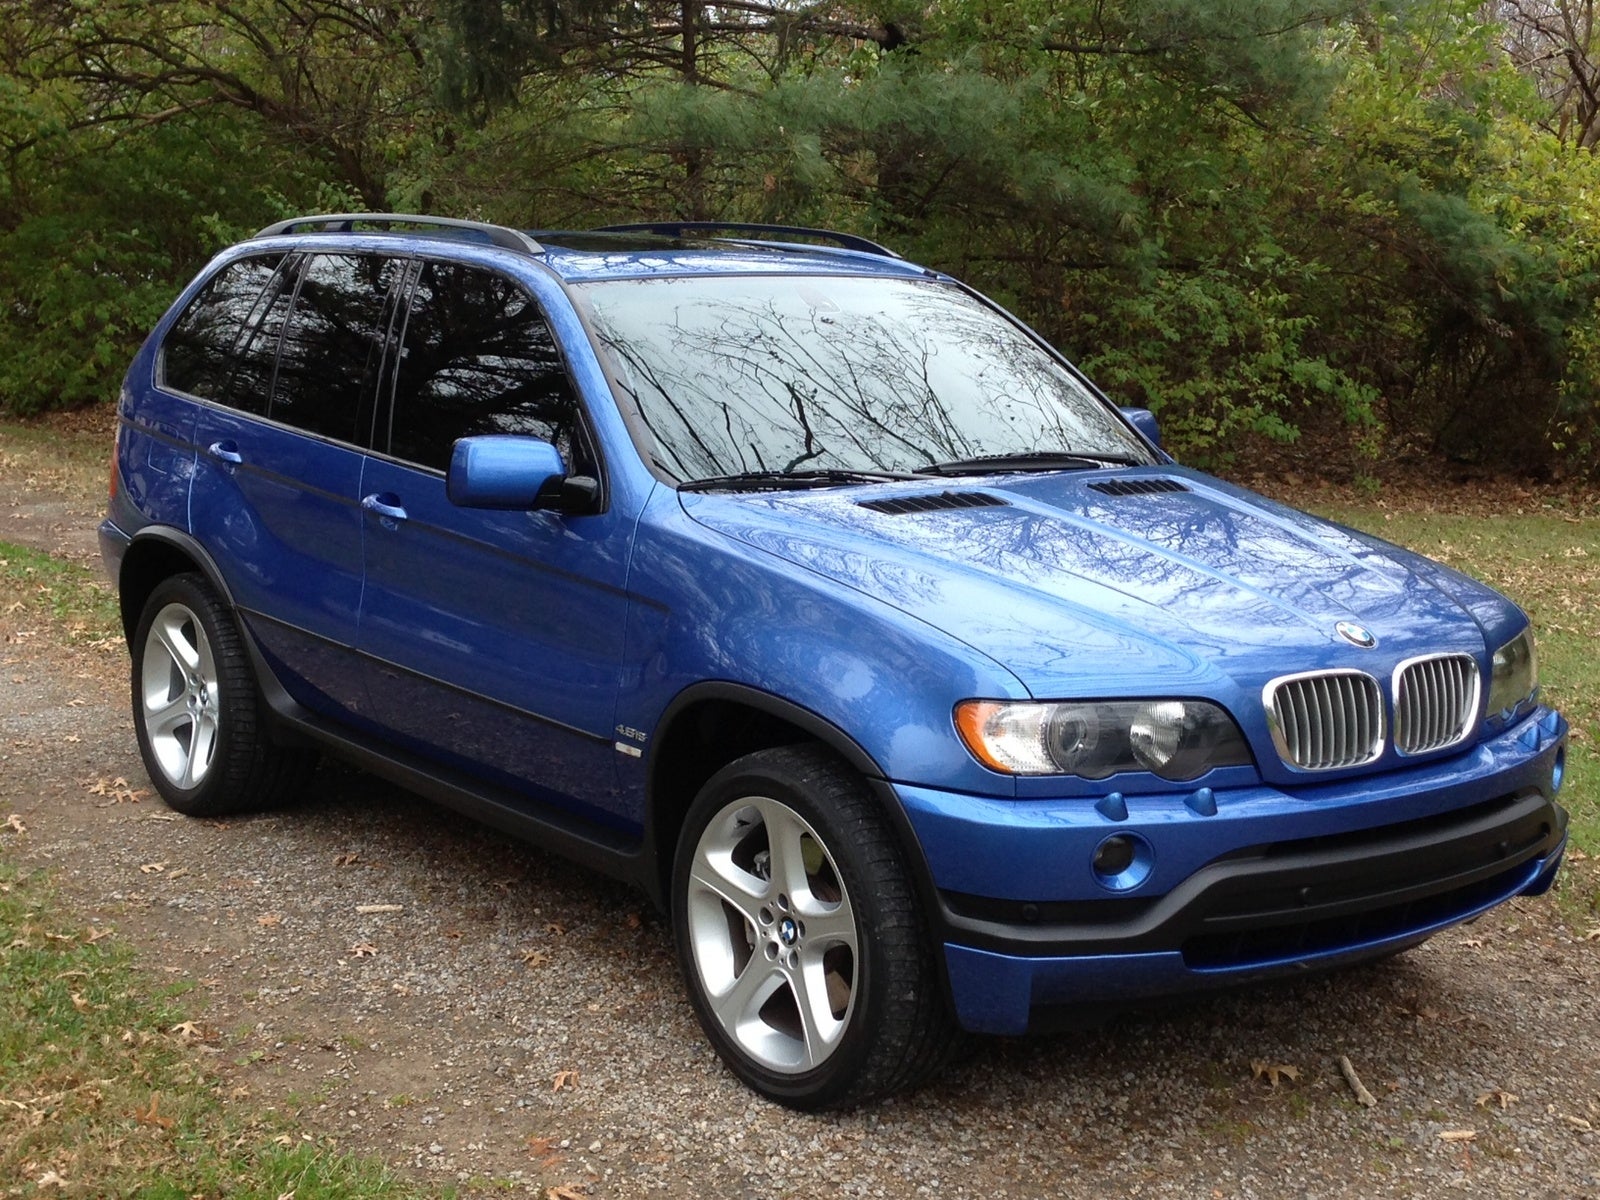 2002 Bmw X5 4 6is Pictures to Pin on Pinterest  PinsDaddy